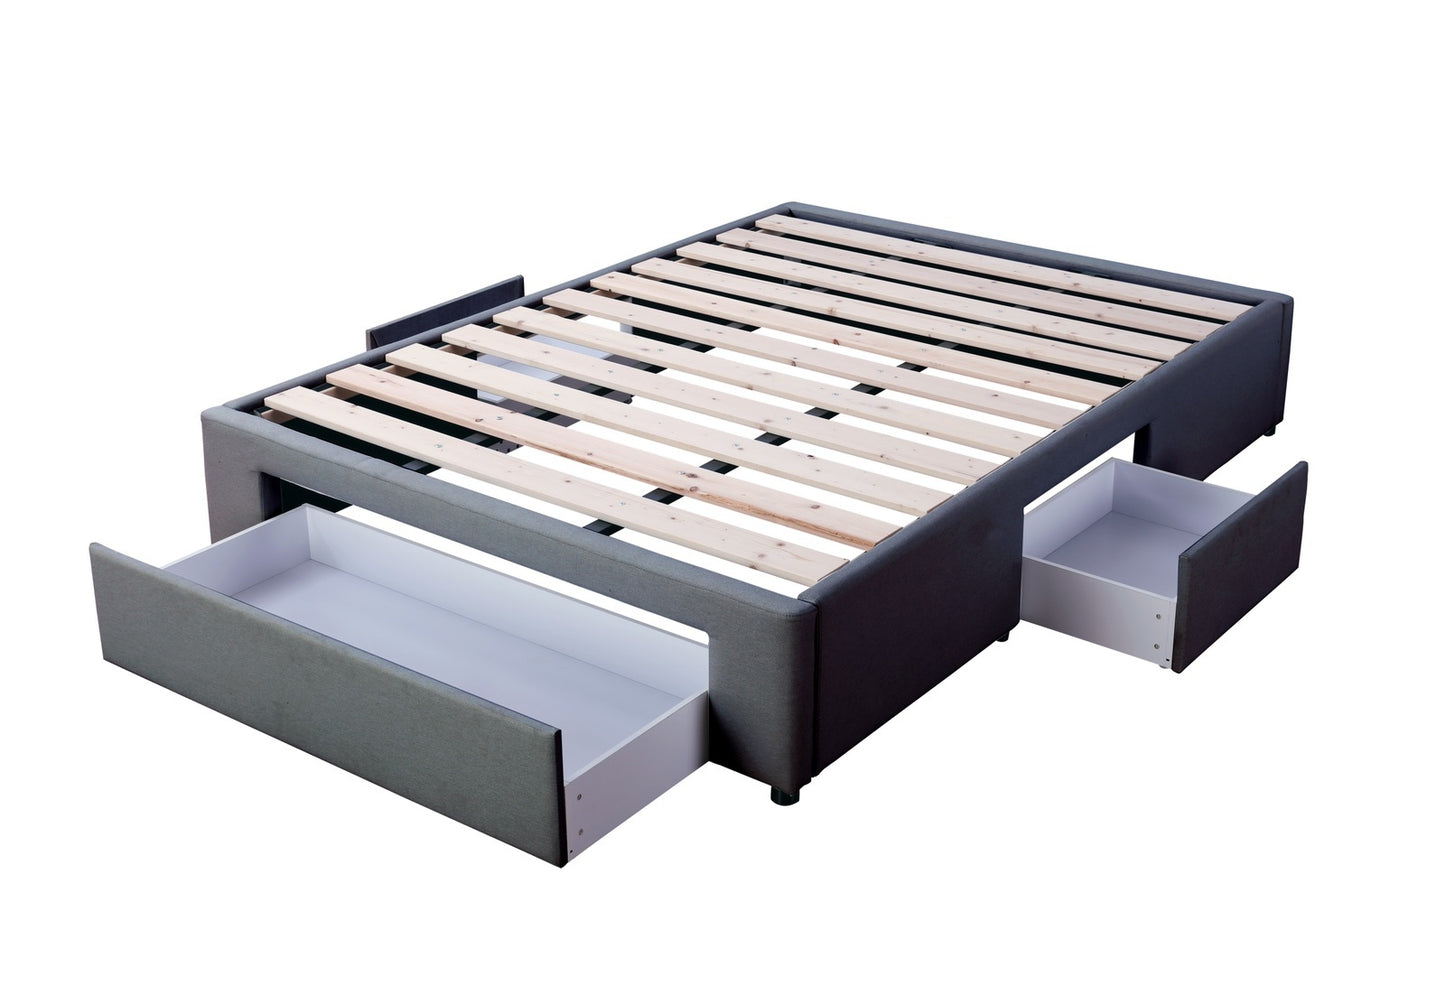 Bed Base - 3 drawers - Charcoal - Double